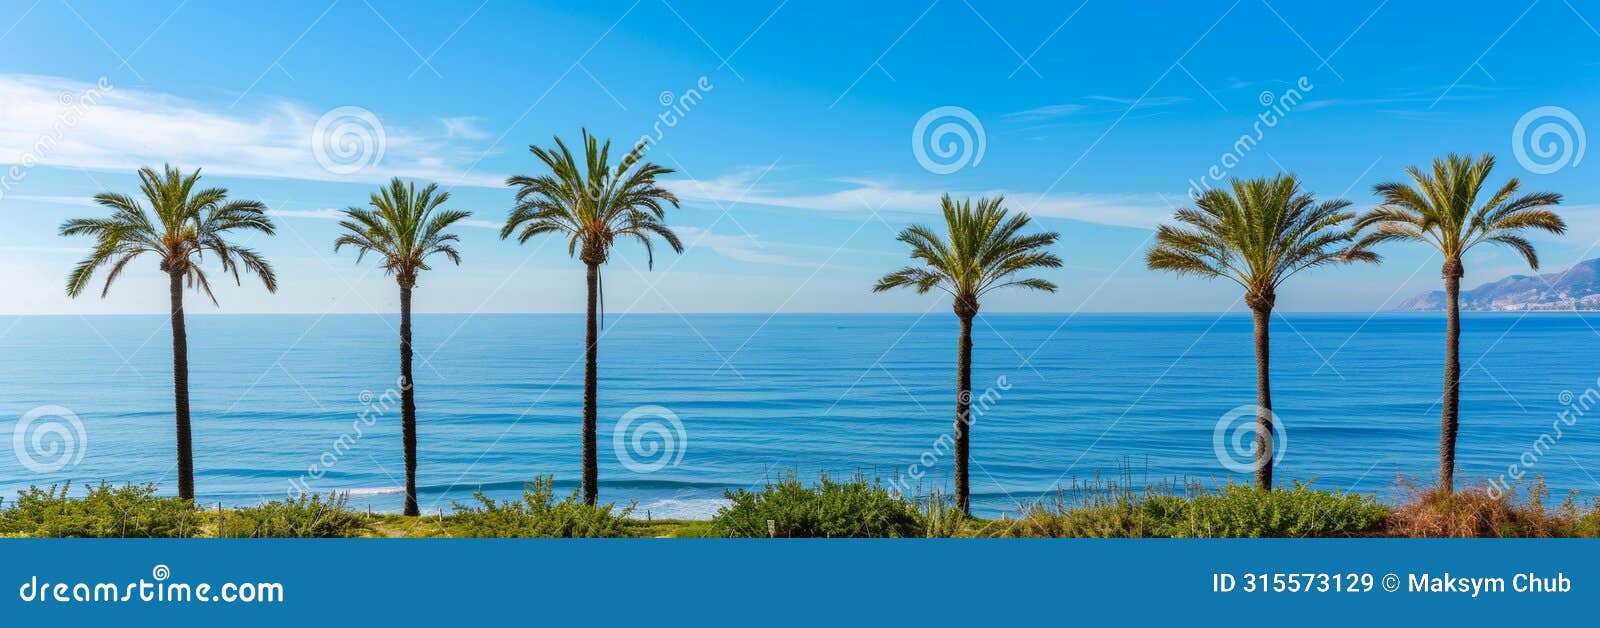 tranquil oasis conquering sea blindness in the midst of serene palm trees allure